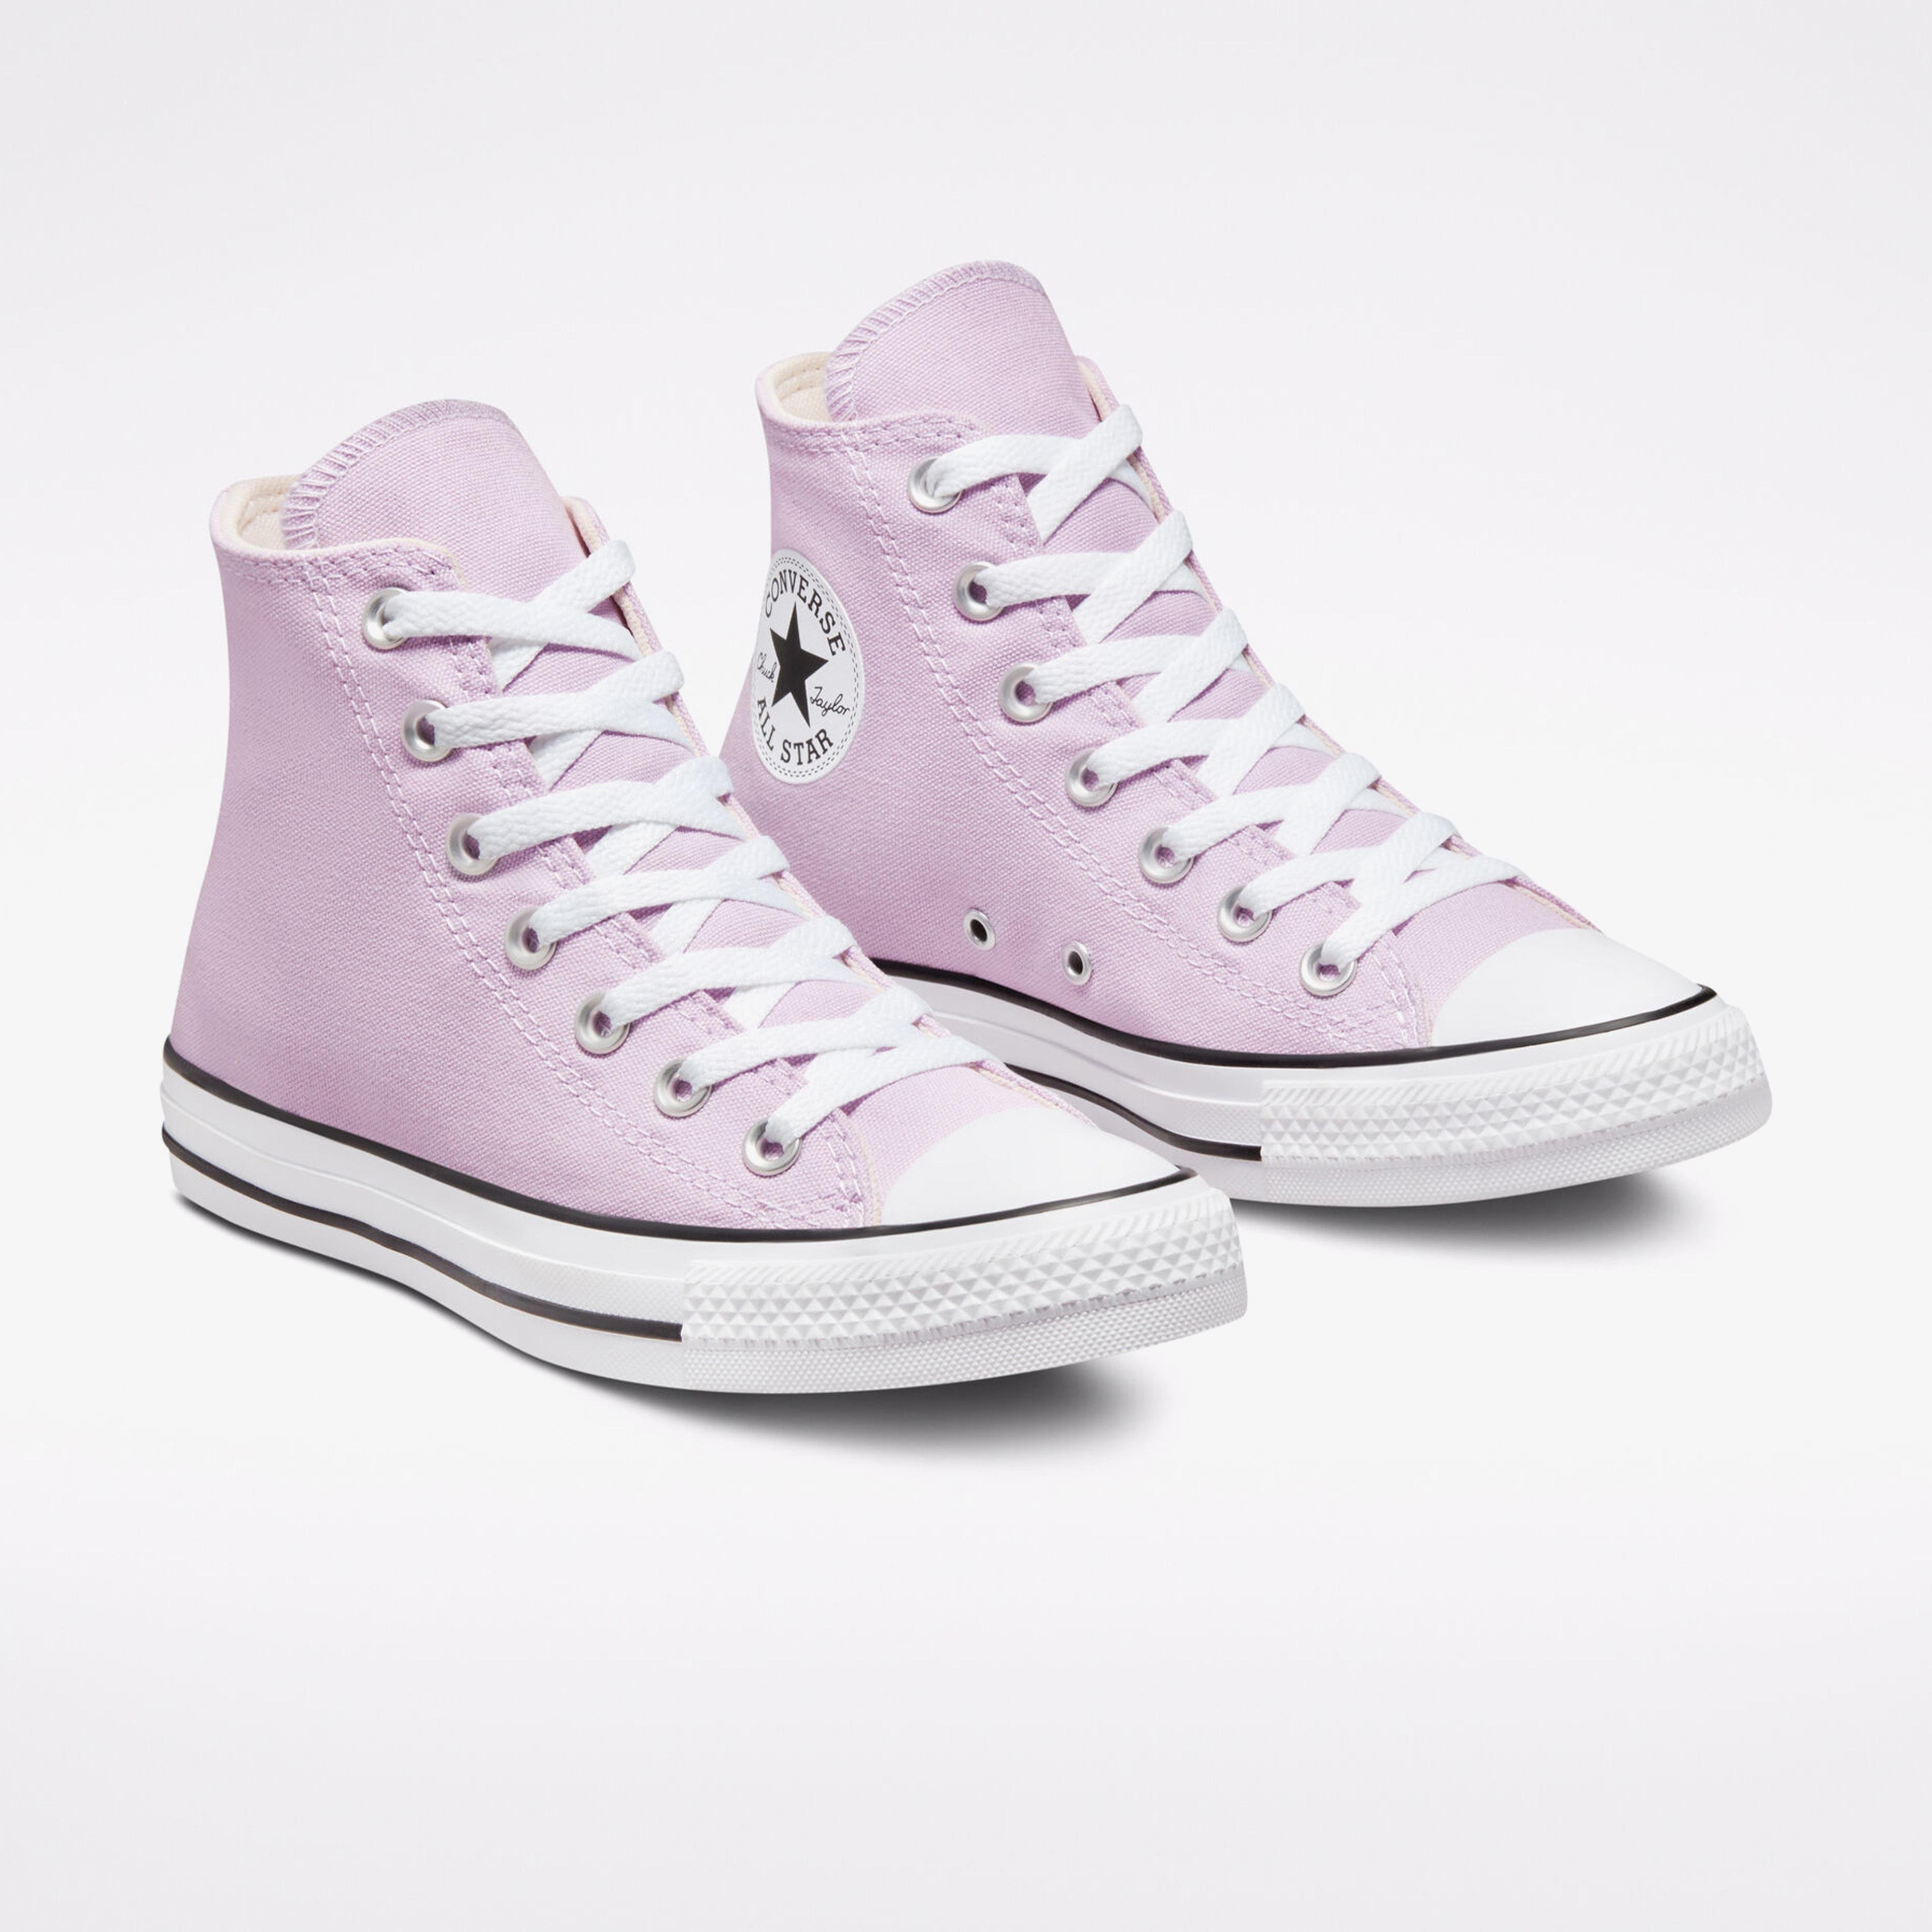 Converse Chuck Taylor All Star Partially Recycled Cotton Unisex Mor Sneaker